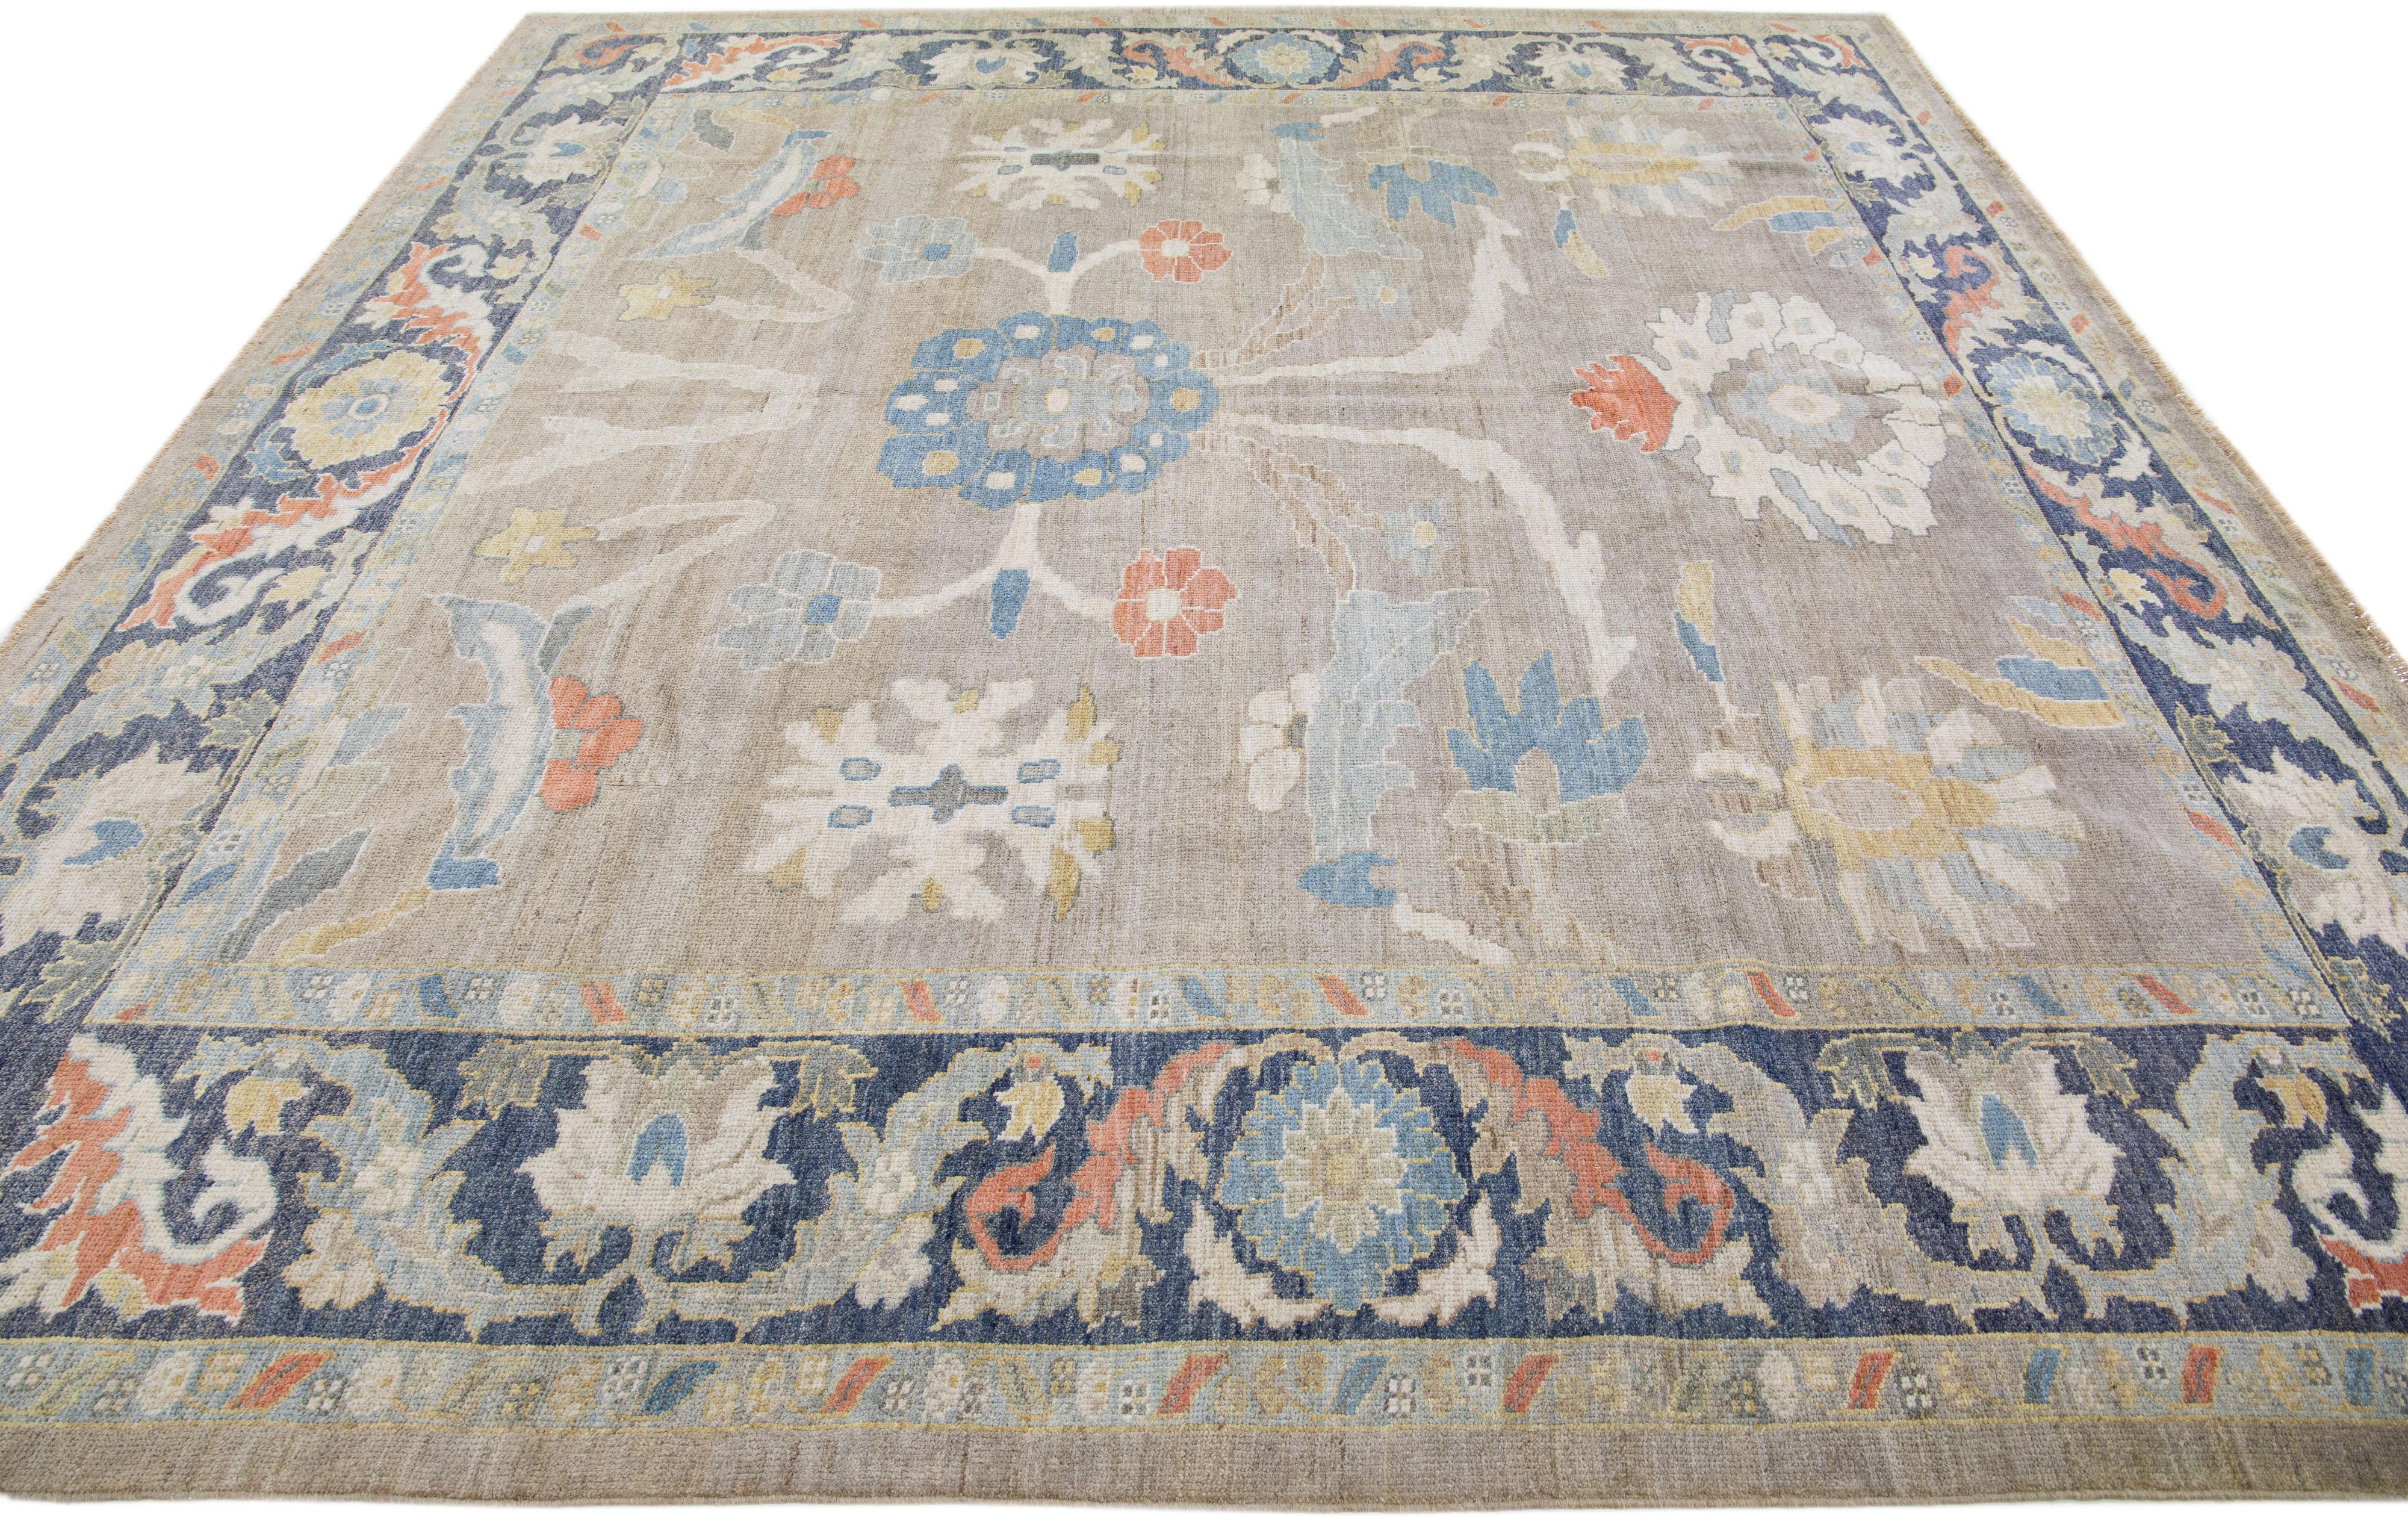 Beautiful modern Sultanabad hand-knotted wool rug with a beige color field. This rug has a navy-blue designed frame with multicolor accents in a gorgeous all-over floral design.

This rug measures: 10'2